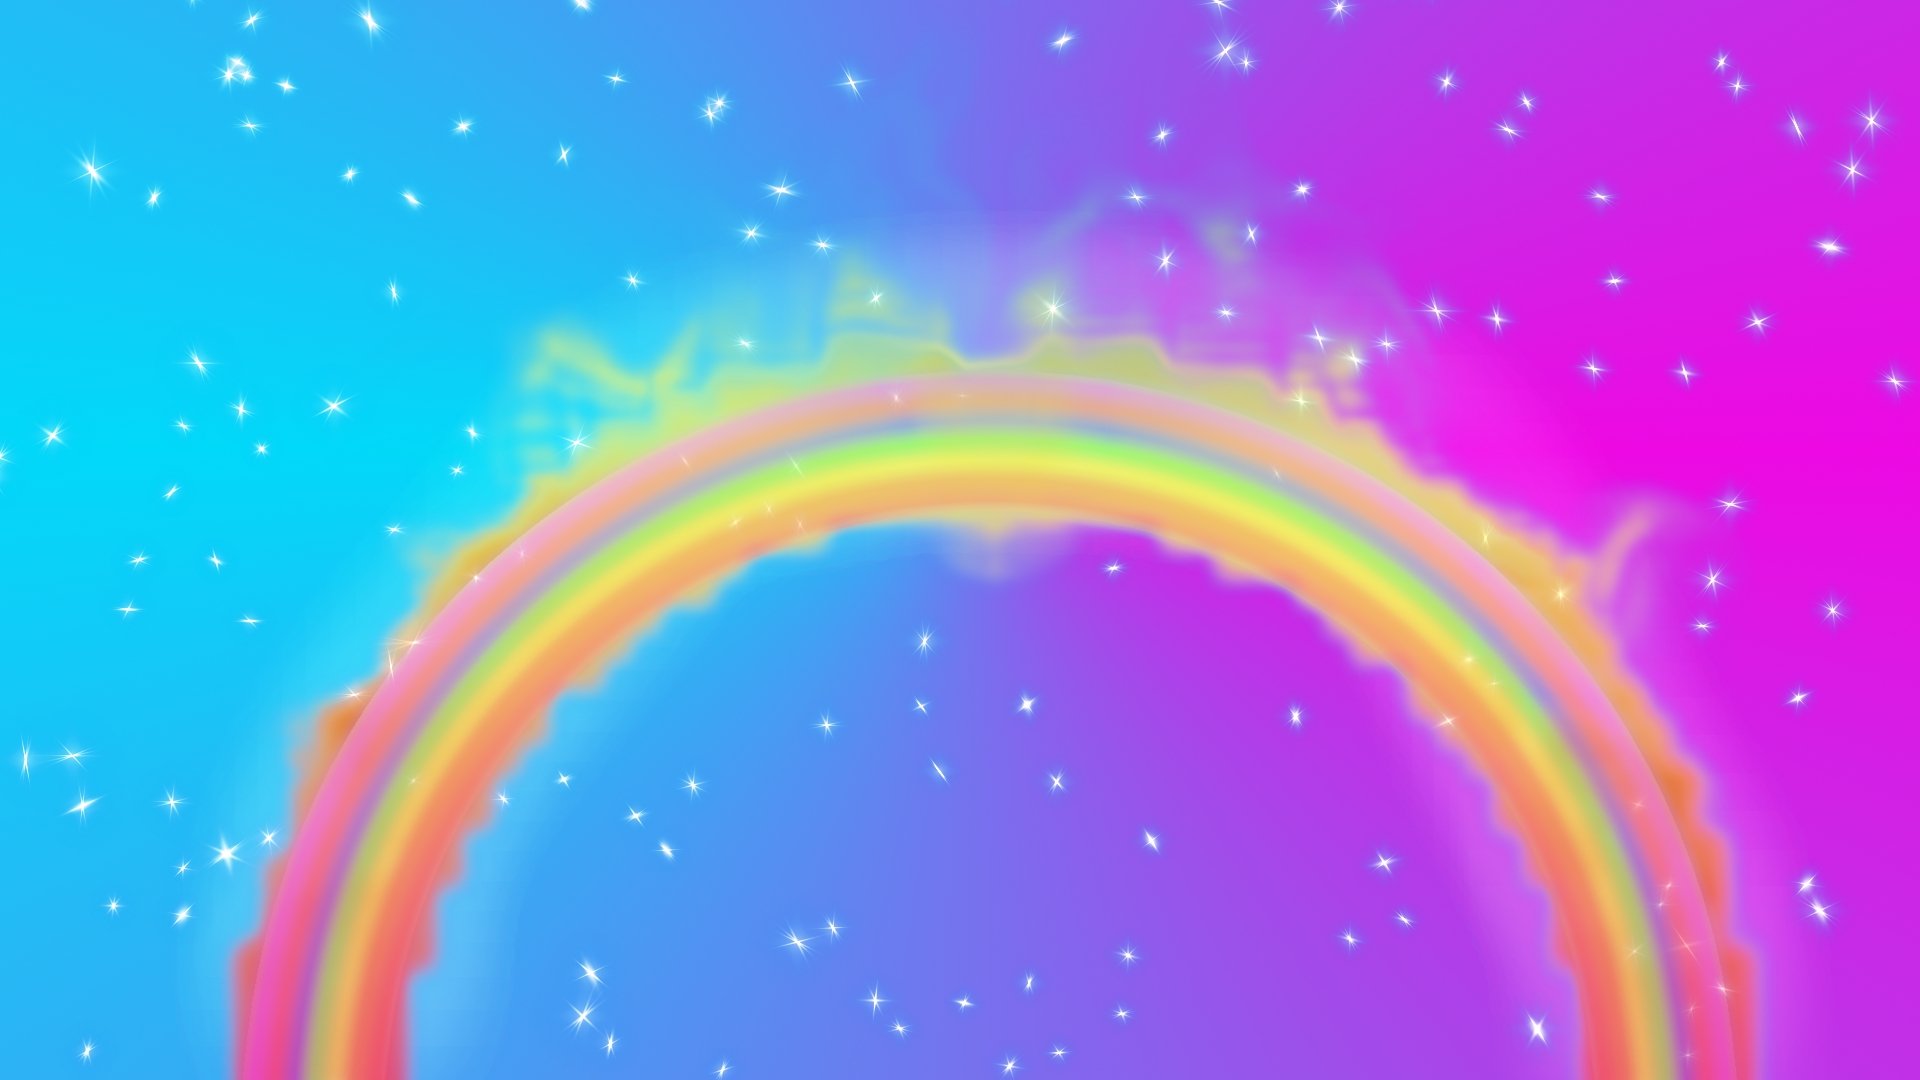  Rainbow Background HD Wallpapers Pictures Images Backgrounds